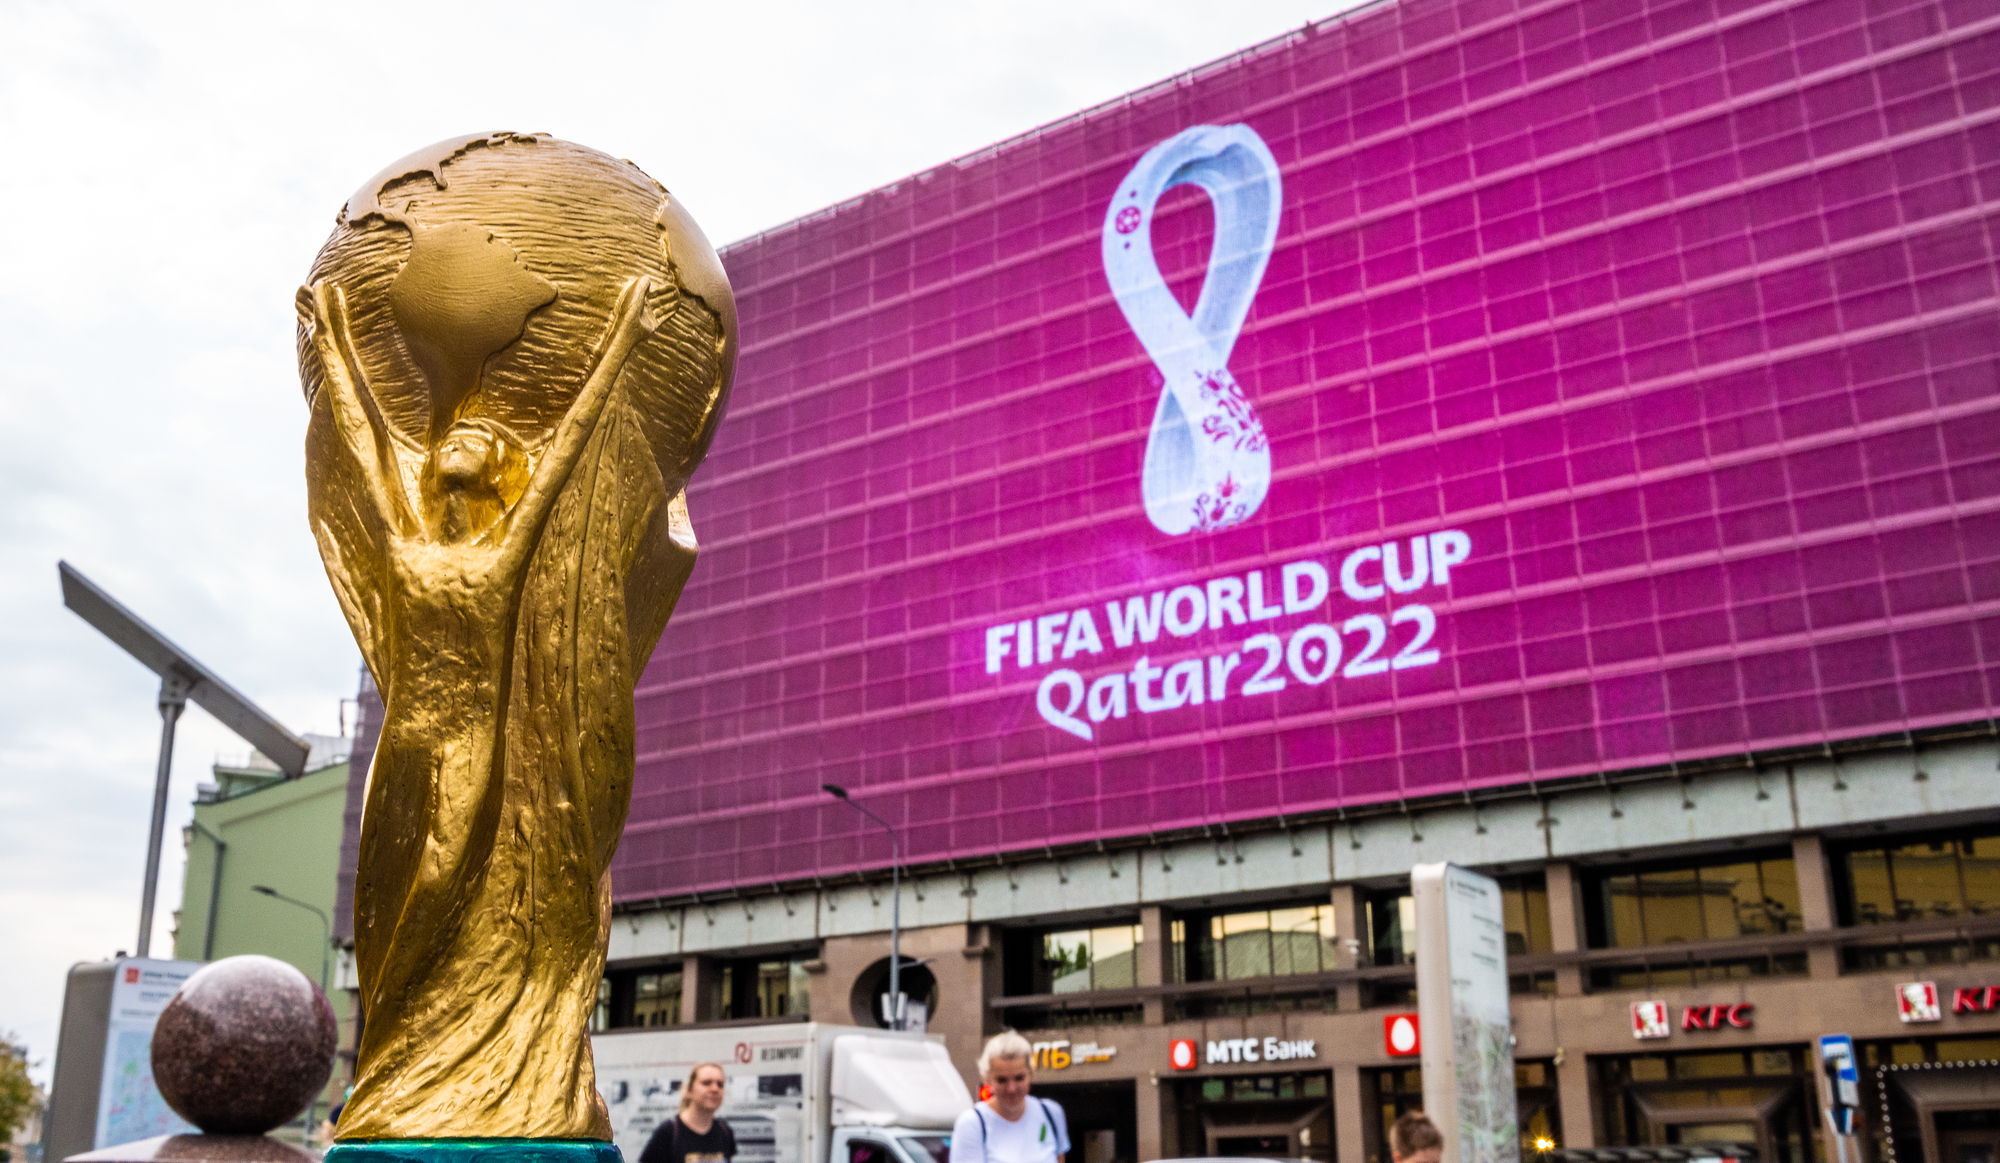 The best matches of the first phase of the World Cup in Qatar 2022